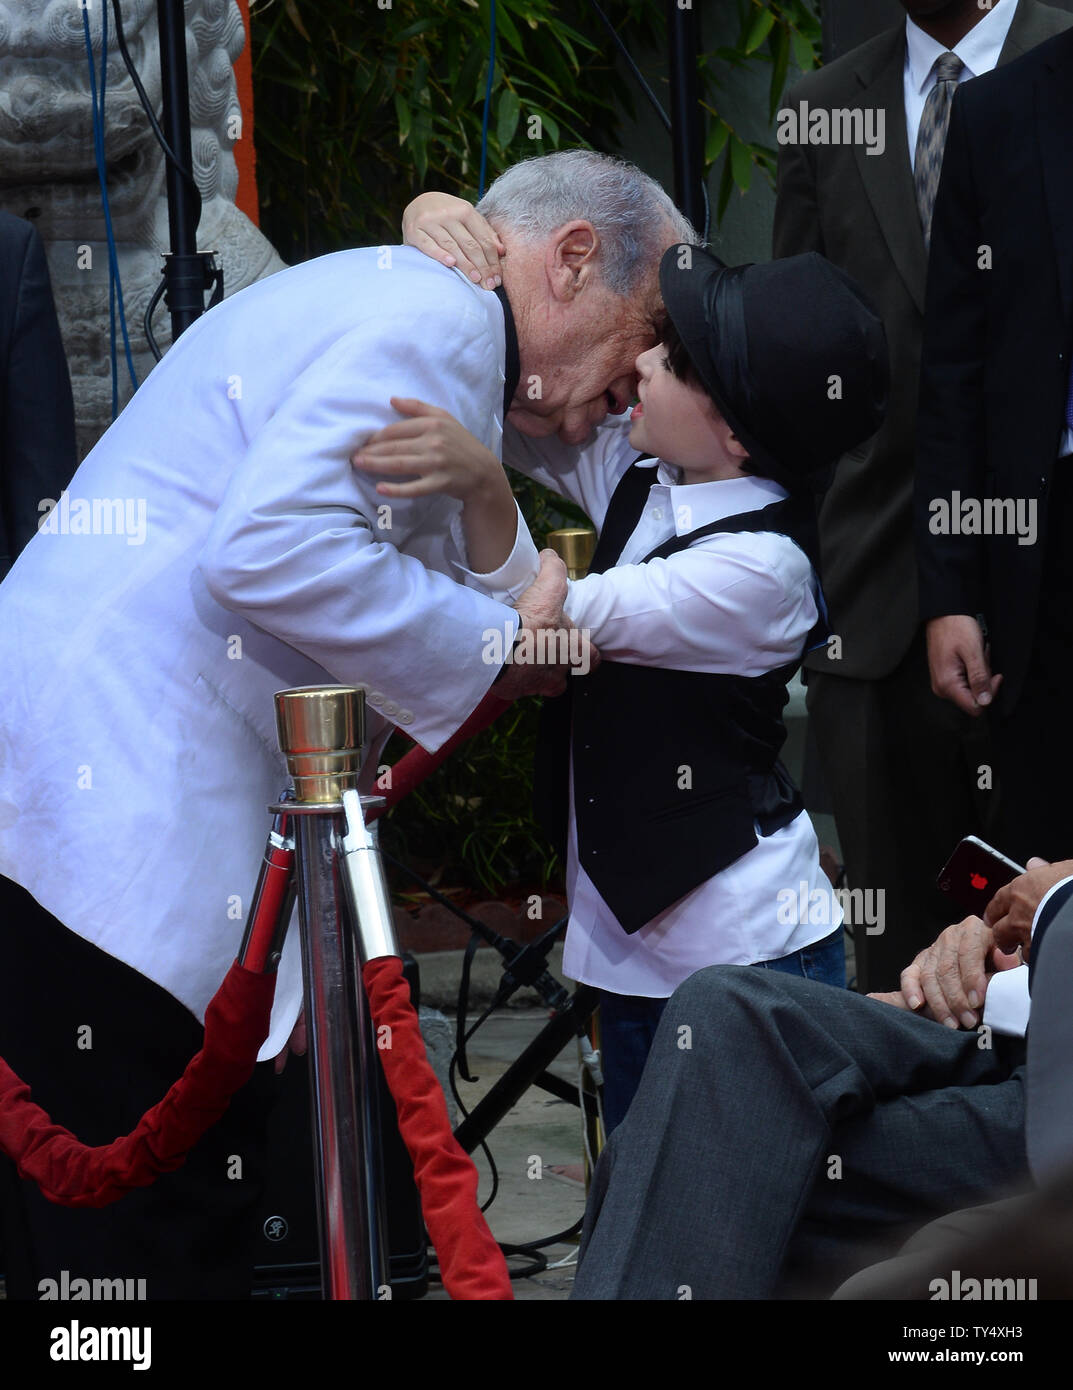 Writer/director/actor Mel Brooks is hugged by his grandson Henry Michael Brooks following Brooks' hands & footprints ceremony in the forecourt of the TCL Chinese Theatre (formerly Grauman's), in the Hollywood section of Los Angeles on September 8, 2014. The award-winning filmmaker wore a prosthetic sixth finger on one hand to add a little extra charm while pressing his feet and hands into cement. The 88-year-old comedian is celebrating the 40th anniversary of his Oscar-nominated film, "Young Frankenstein."  UPI/Jim Ruymen Stock Photo